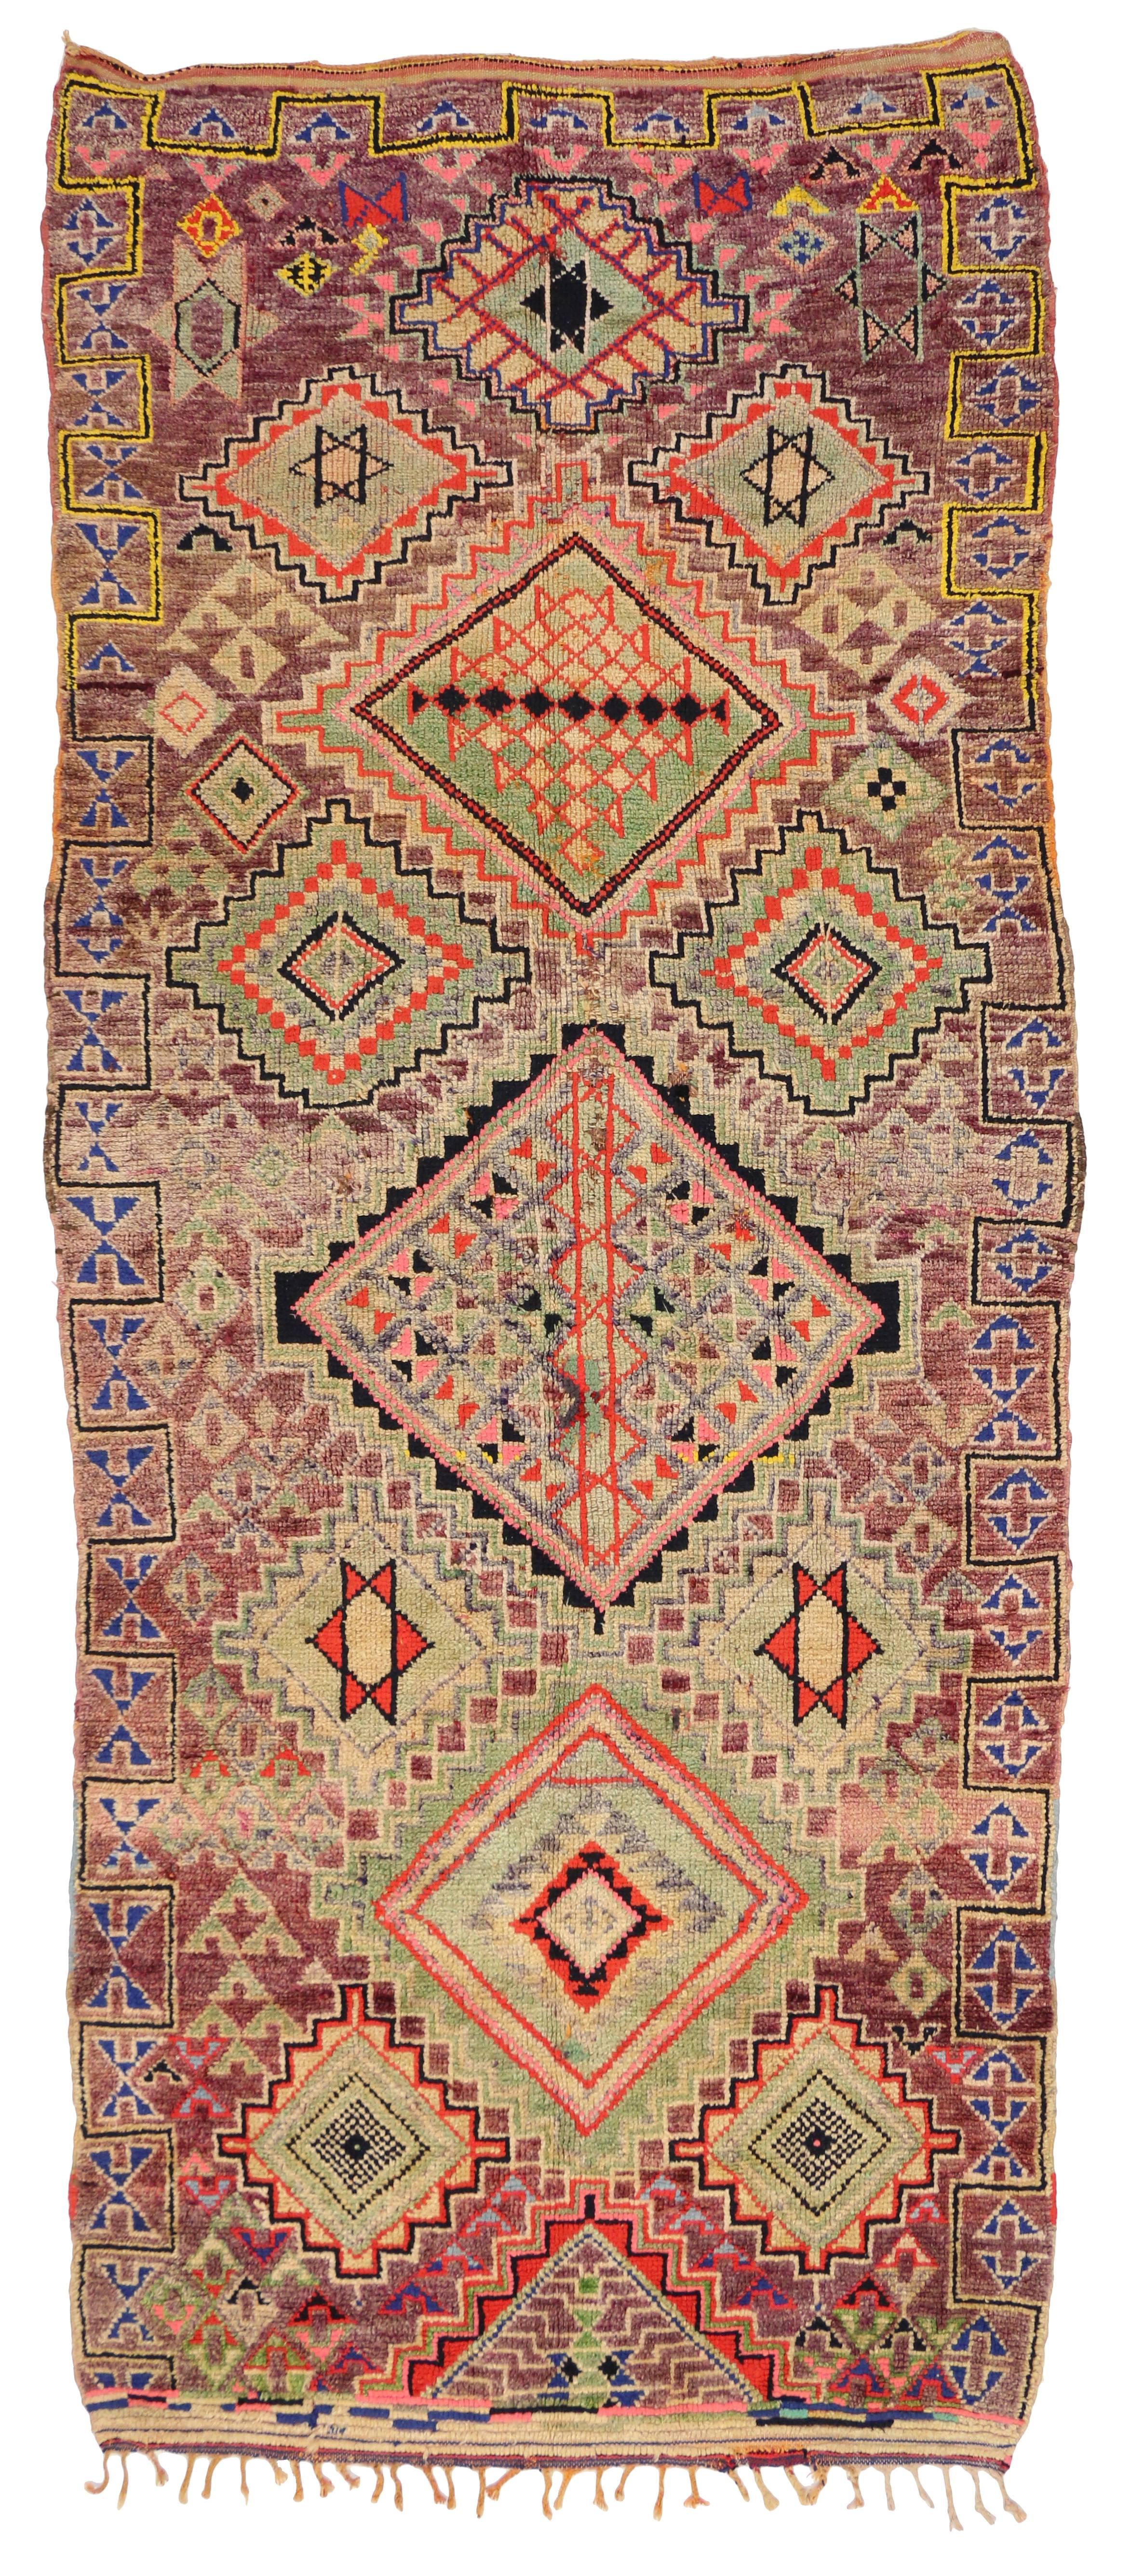 20th Century Vintage Berber Moroccan Rug with Modern Tribal Style and Judaic Influence